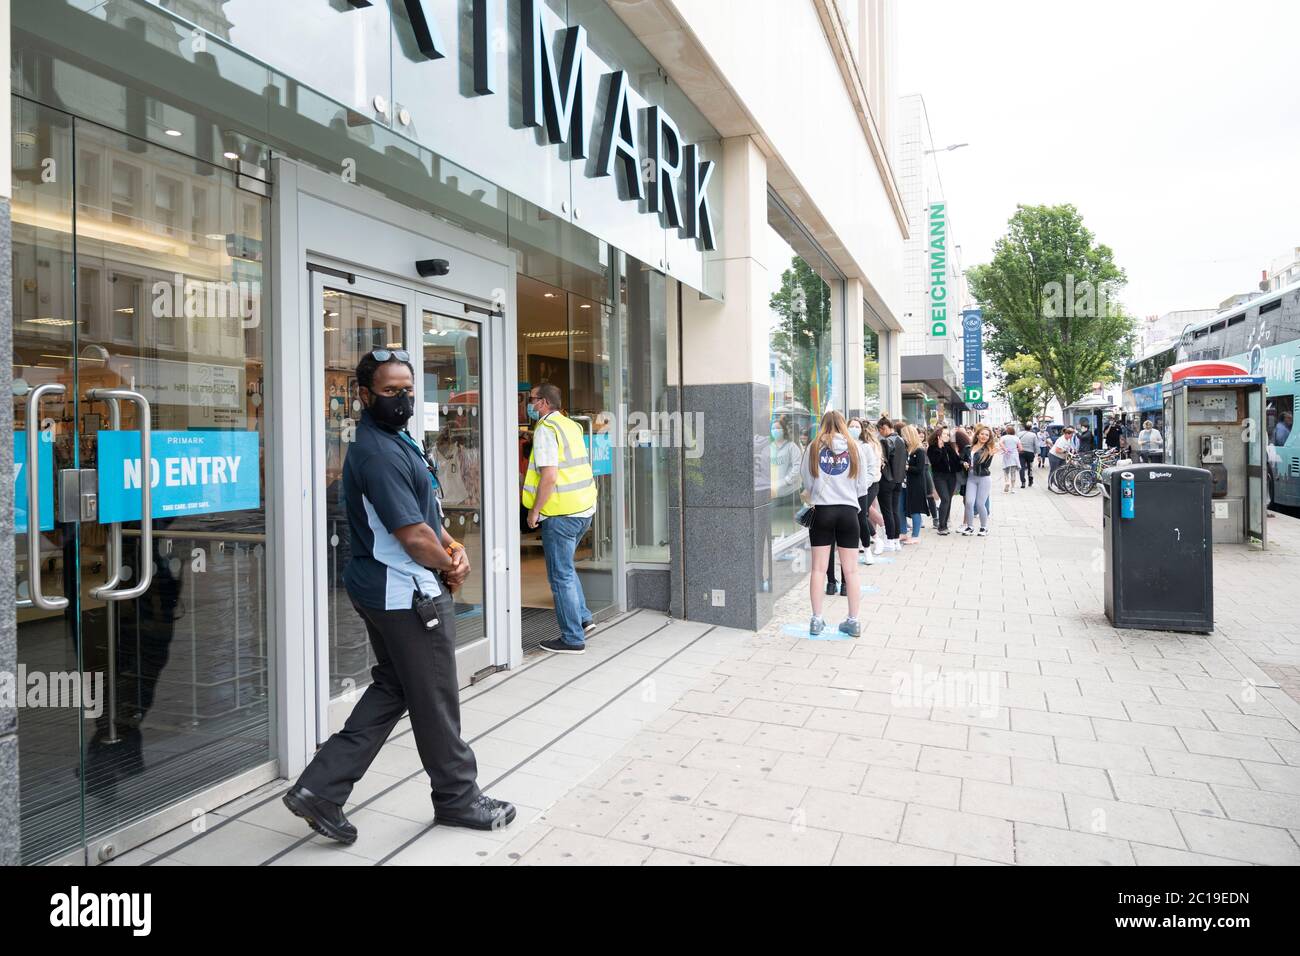 Kiks Karriere succes Primark Brighton High Resolution Stock Photography and Images - Alamy